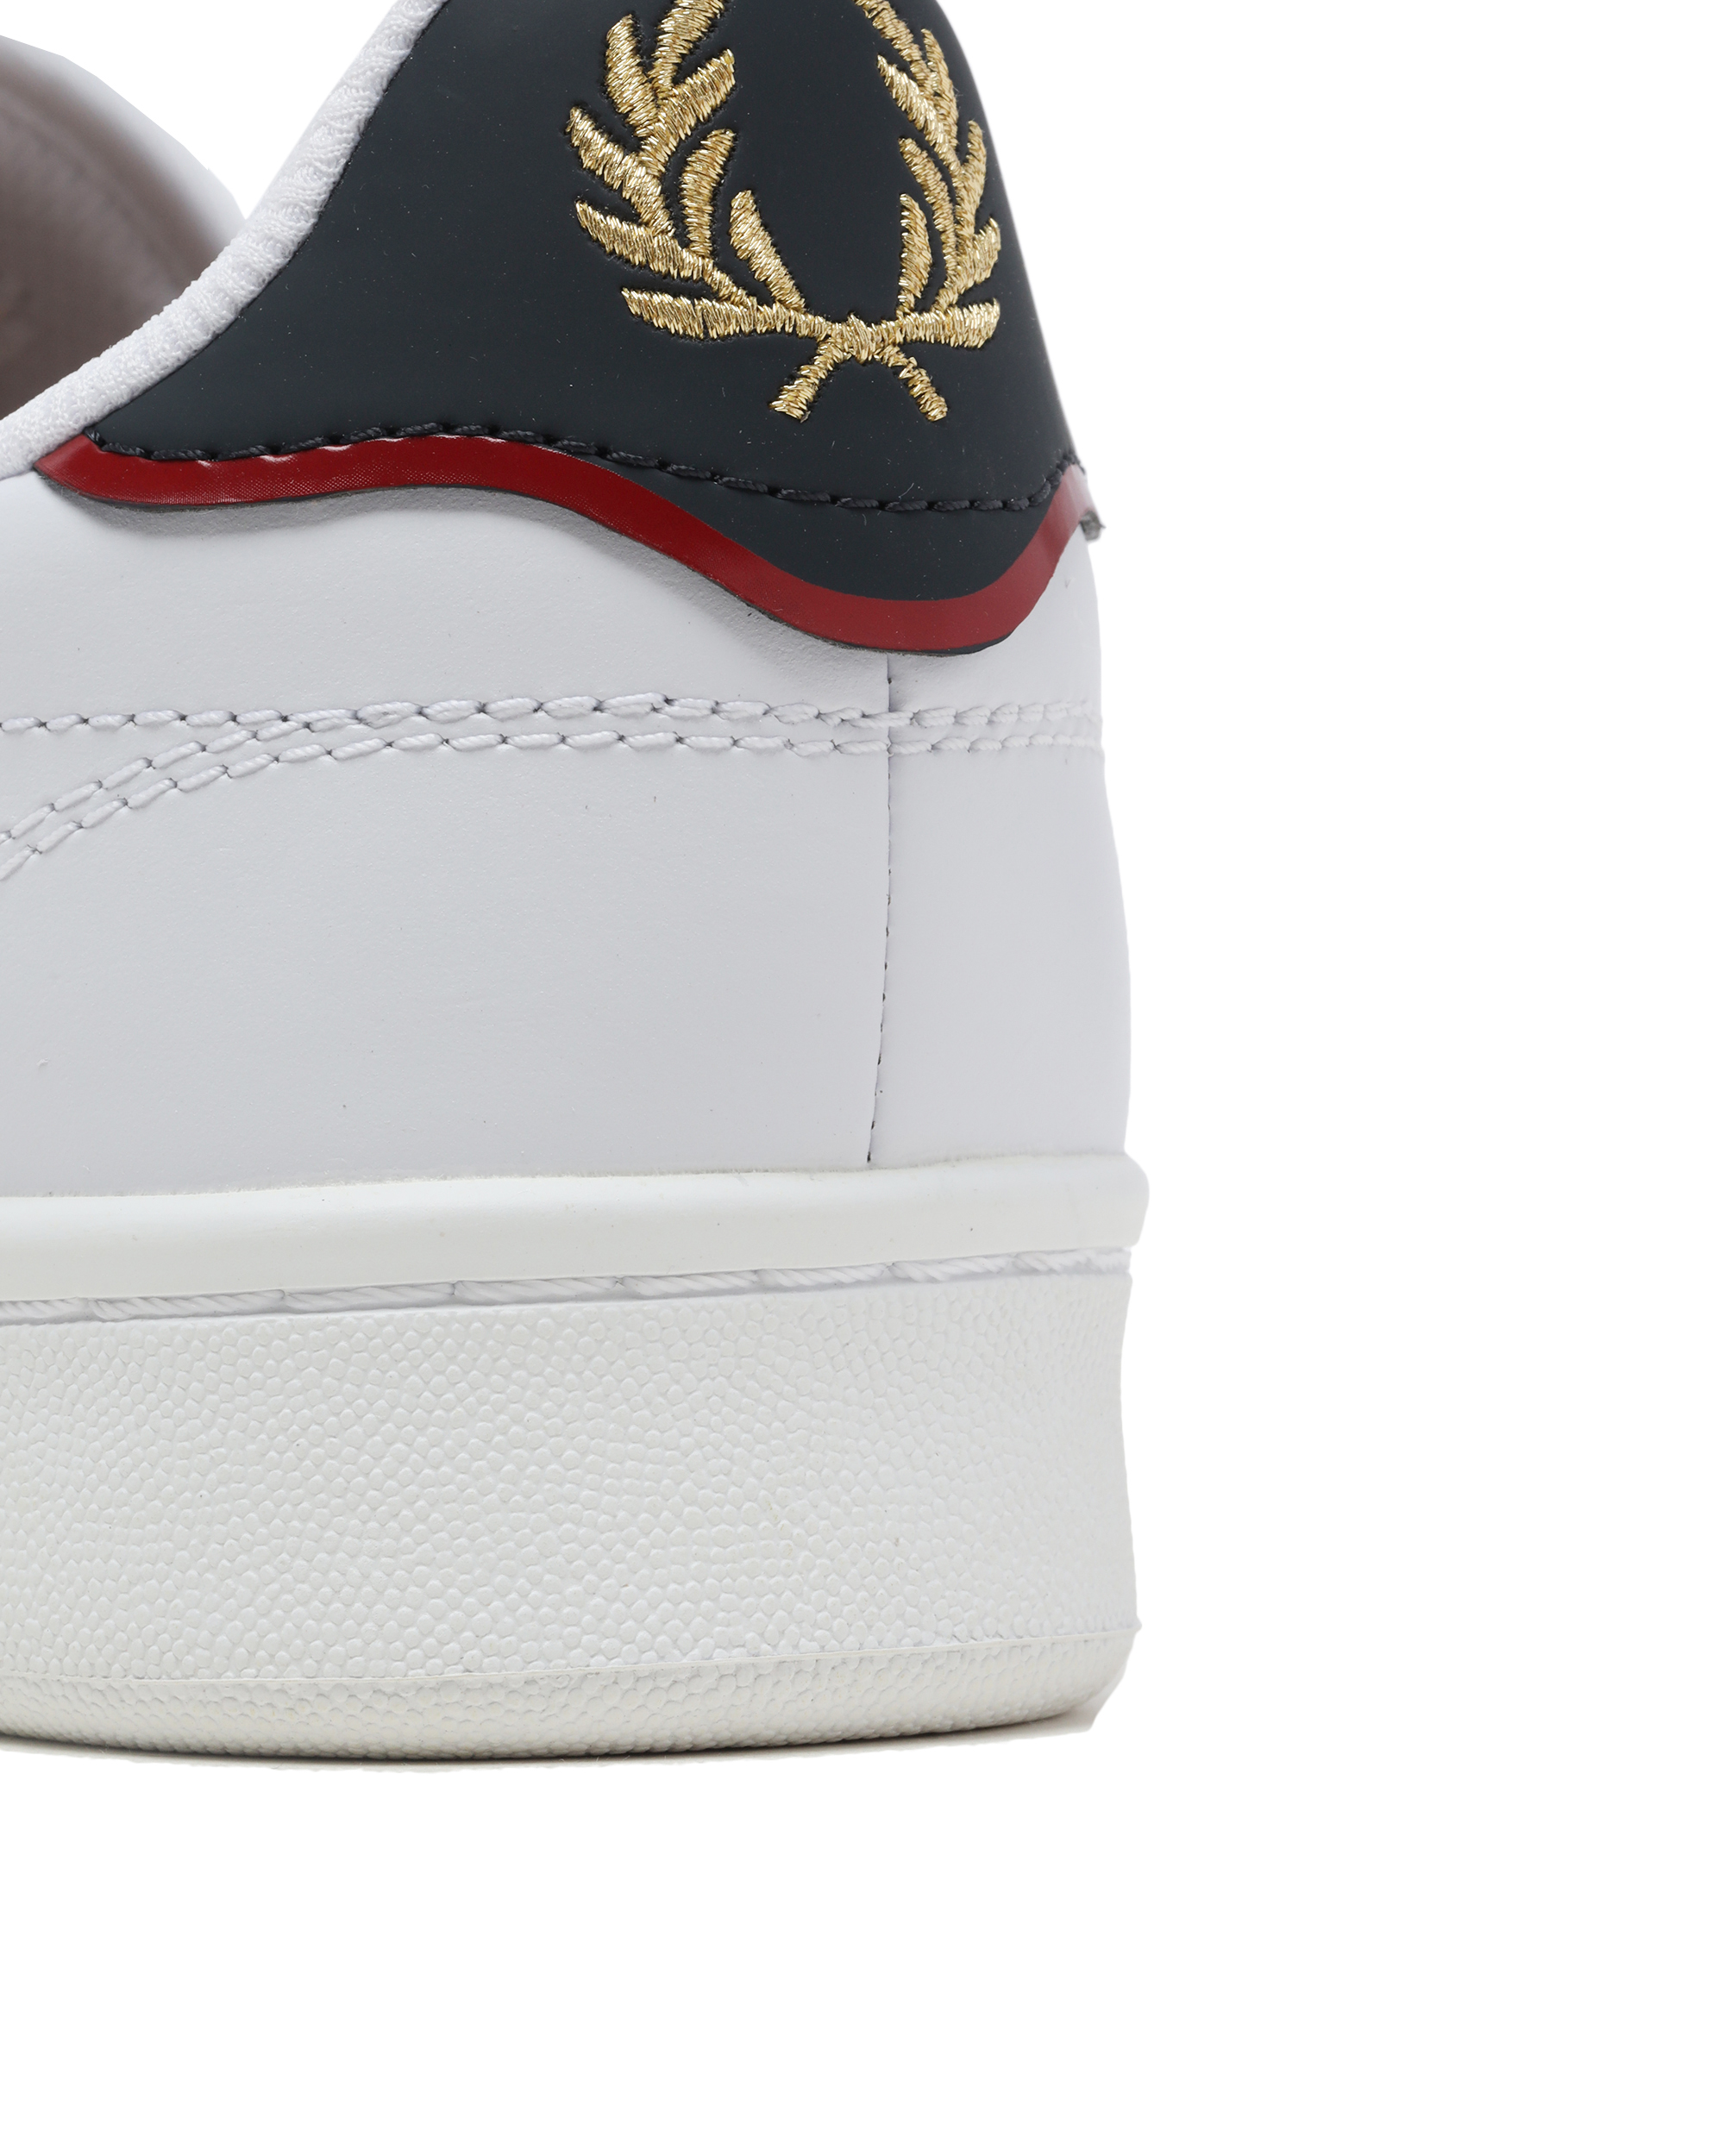 Fred Perry Kingston Leather Sneakers | Fred Perry Kingston Leather Sneaker  | suturasonline.com.br